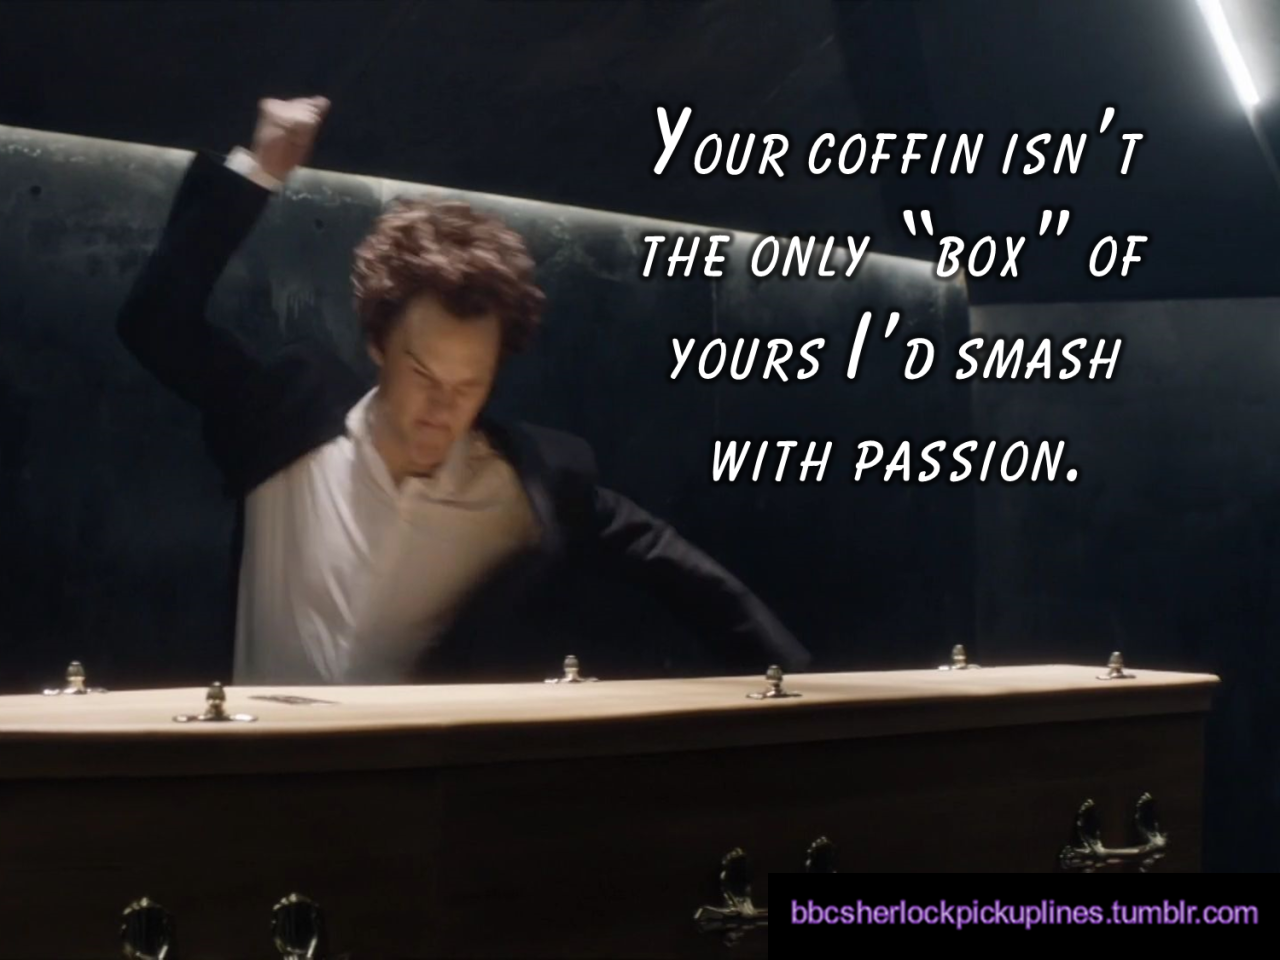 “Your coffin isn’t the only ‘box’ of yours I’d smash with passion.”Based